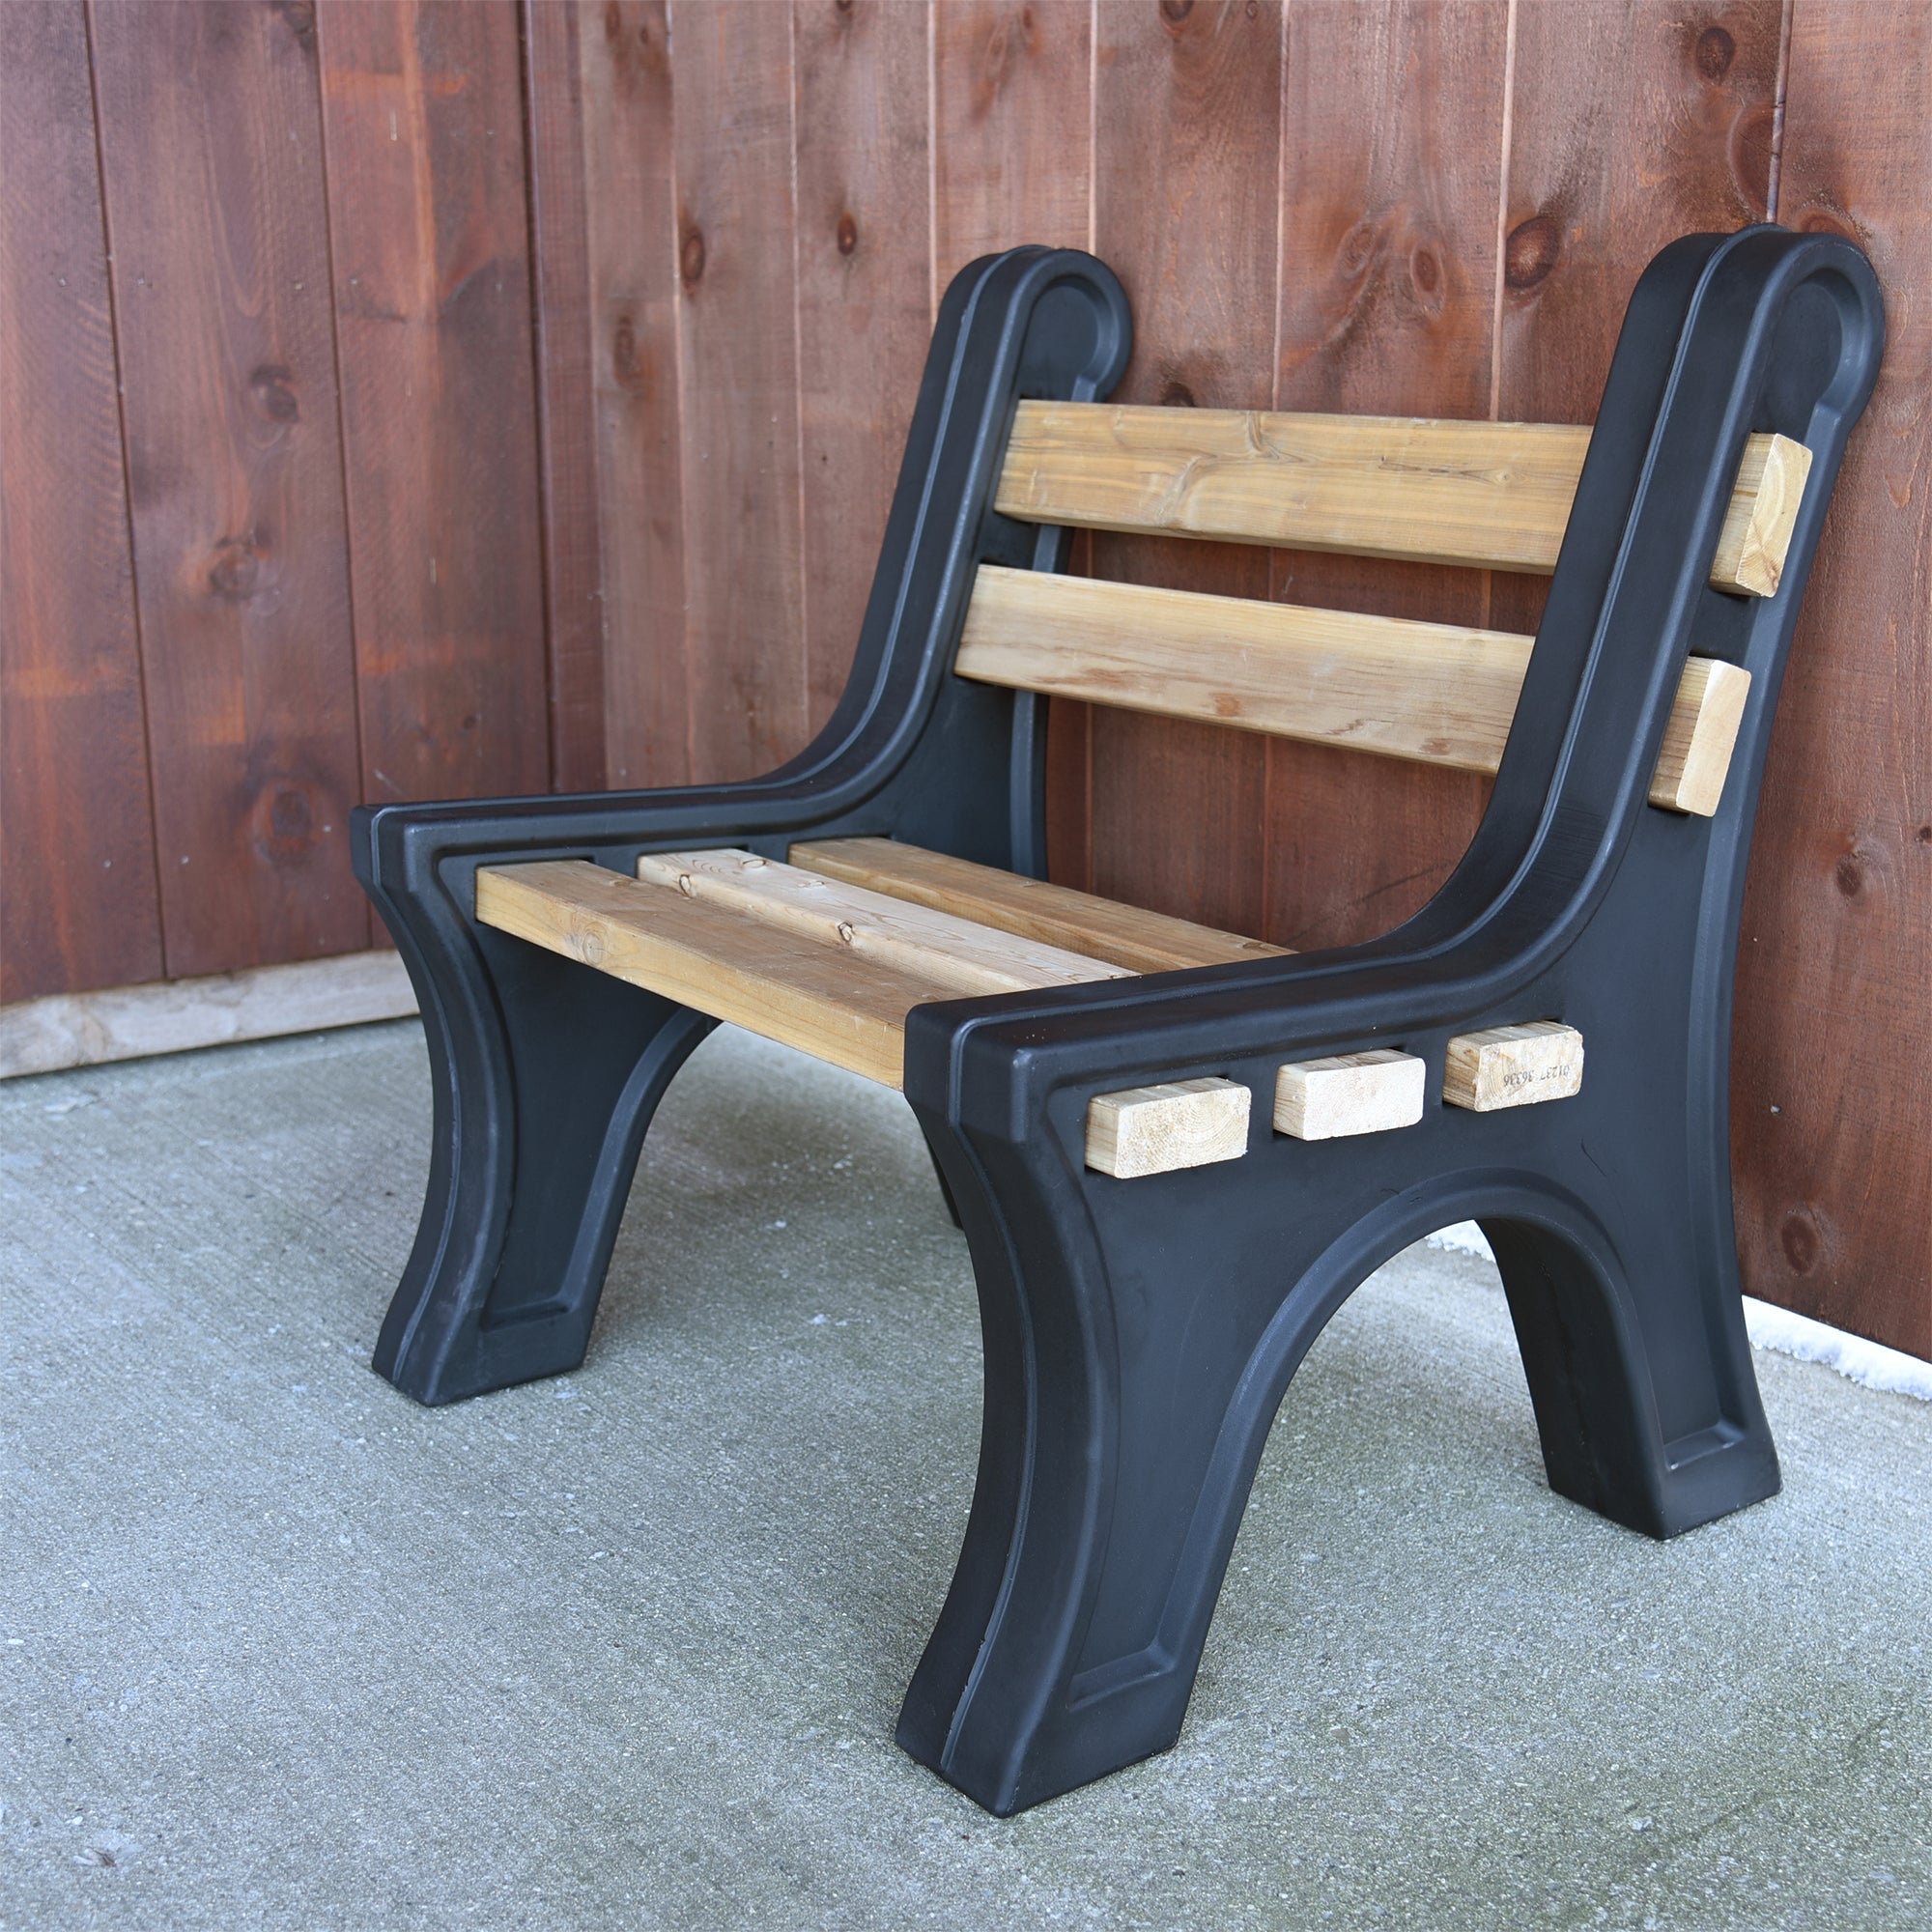 Modern Bench Ends With Backrest